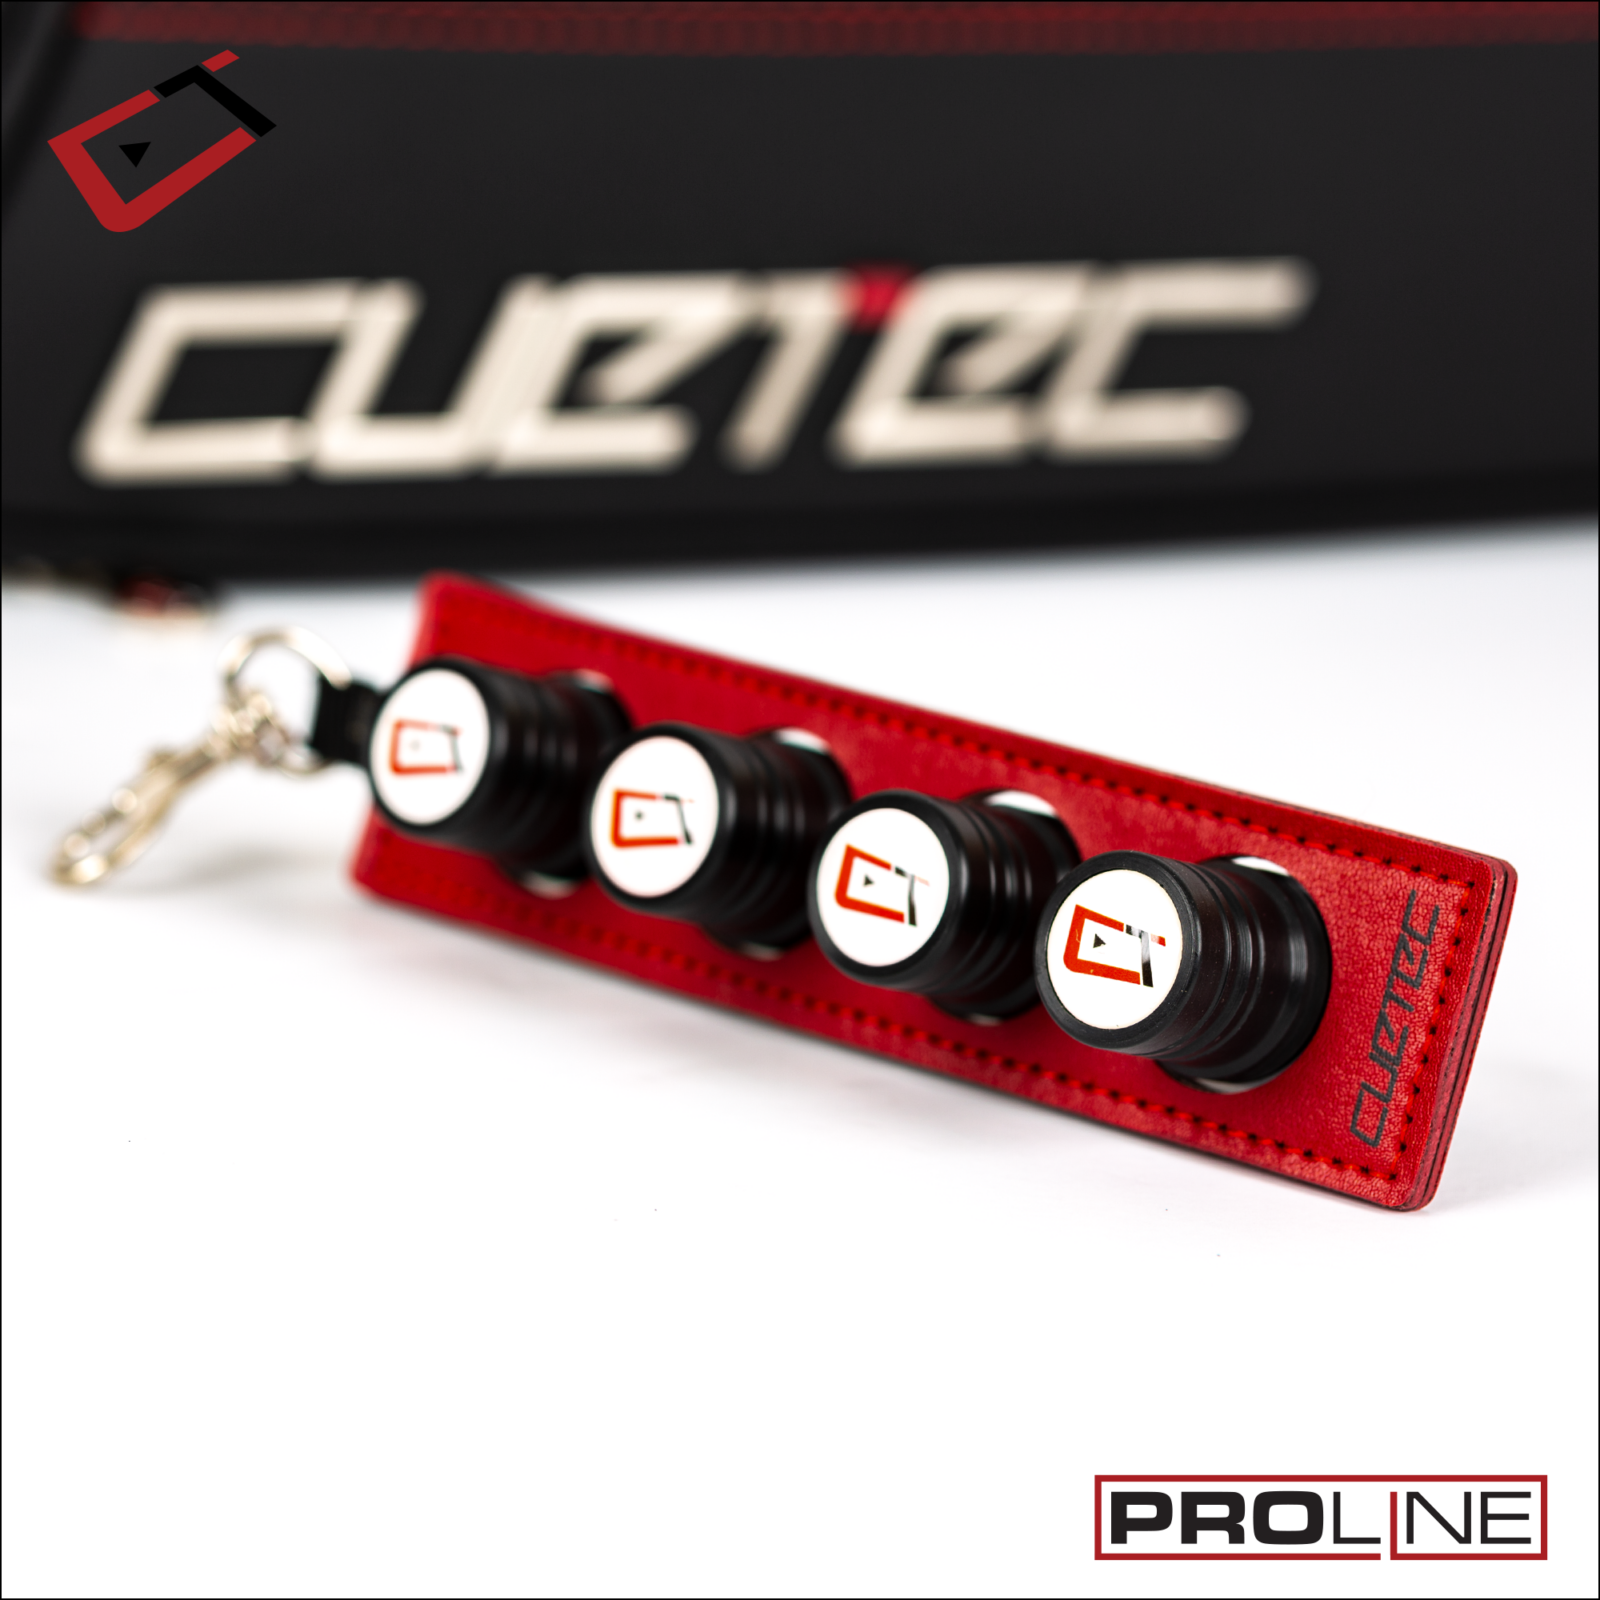 Cuetec Pro Line 2x4 Hard Case Joint Protector Holder